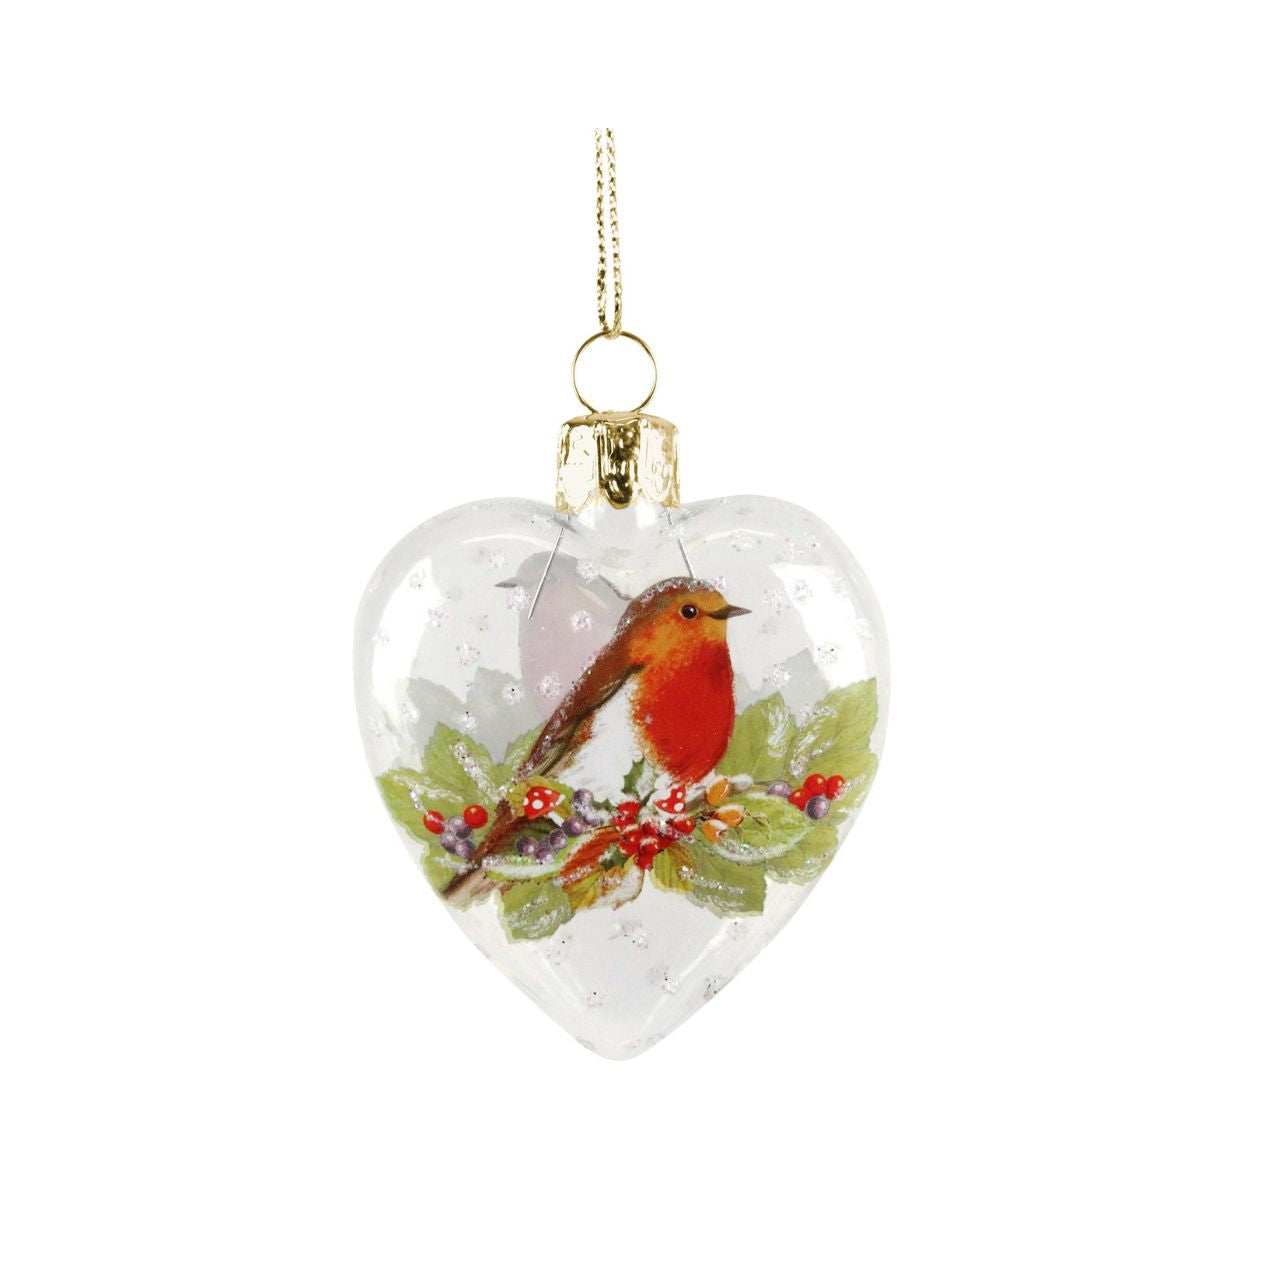 Gisela Graham Heart-Shaped Bauble with Robin Christmas Decoration  This unique heart-shaped Gisela Graham bauble is decorated with a Robin Christmas decoration, adding a whimsical touch to your holiday tree. Crafted with glass, it is sure to be a treasured family heirloom.